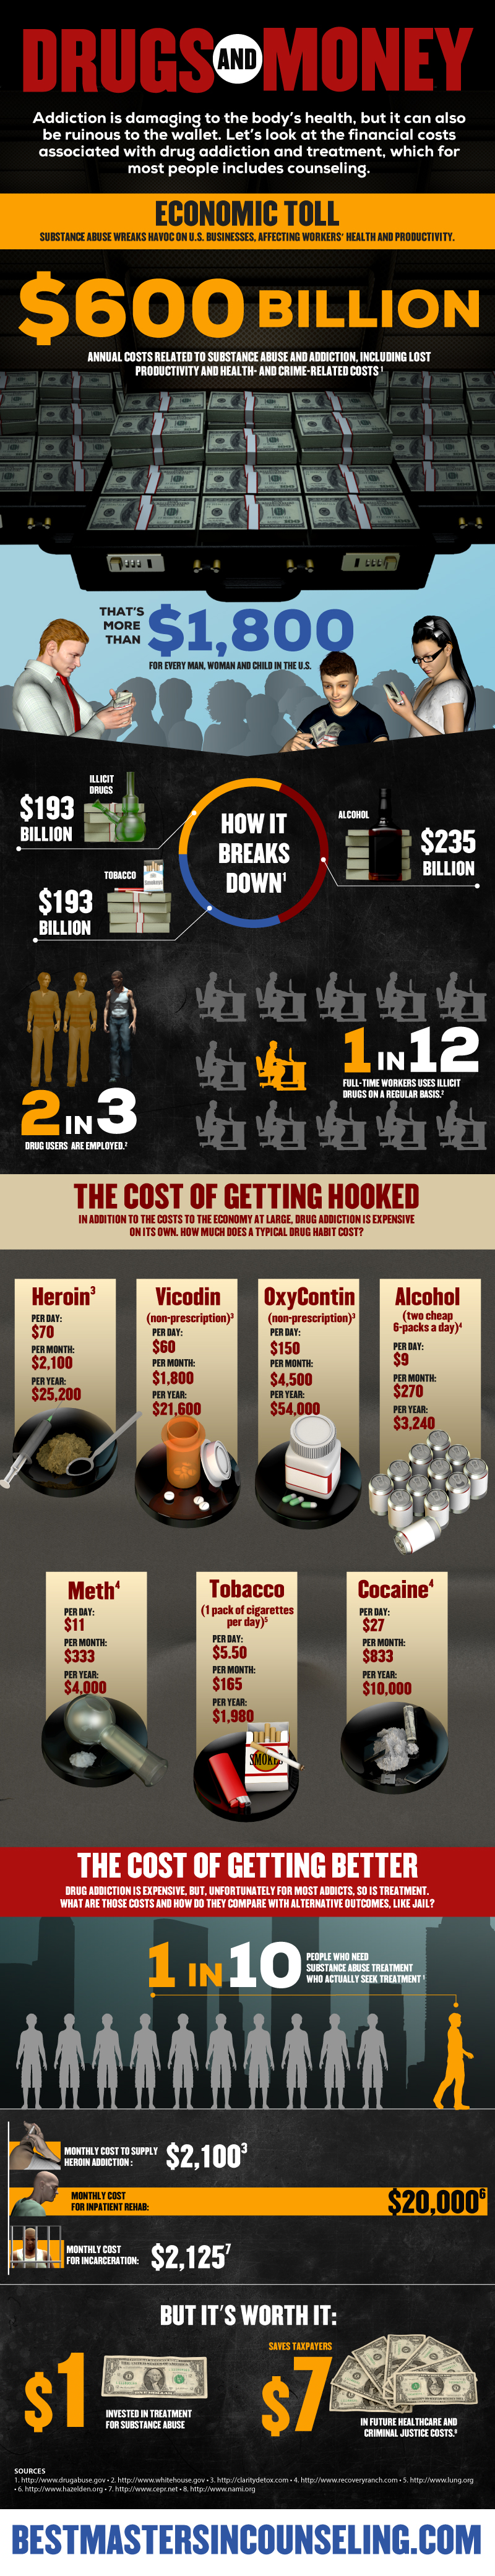 Drugs and Money: The Costs of Addiction